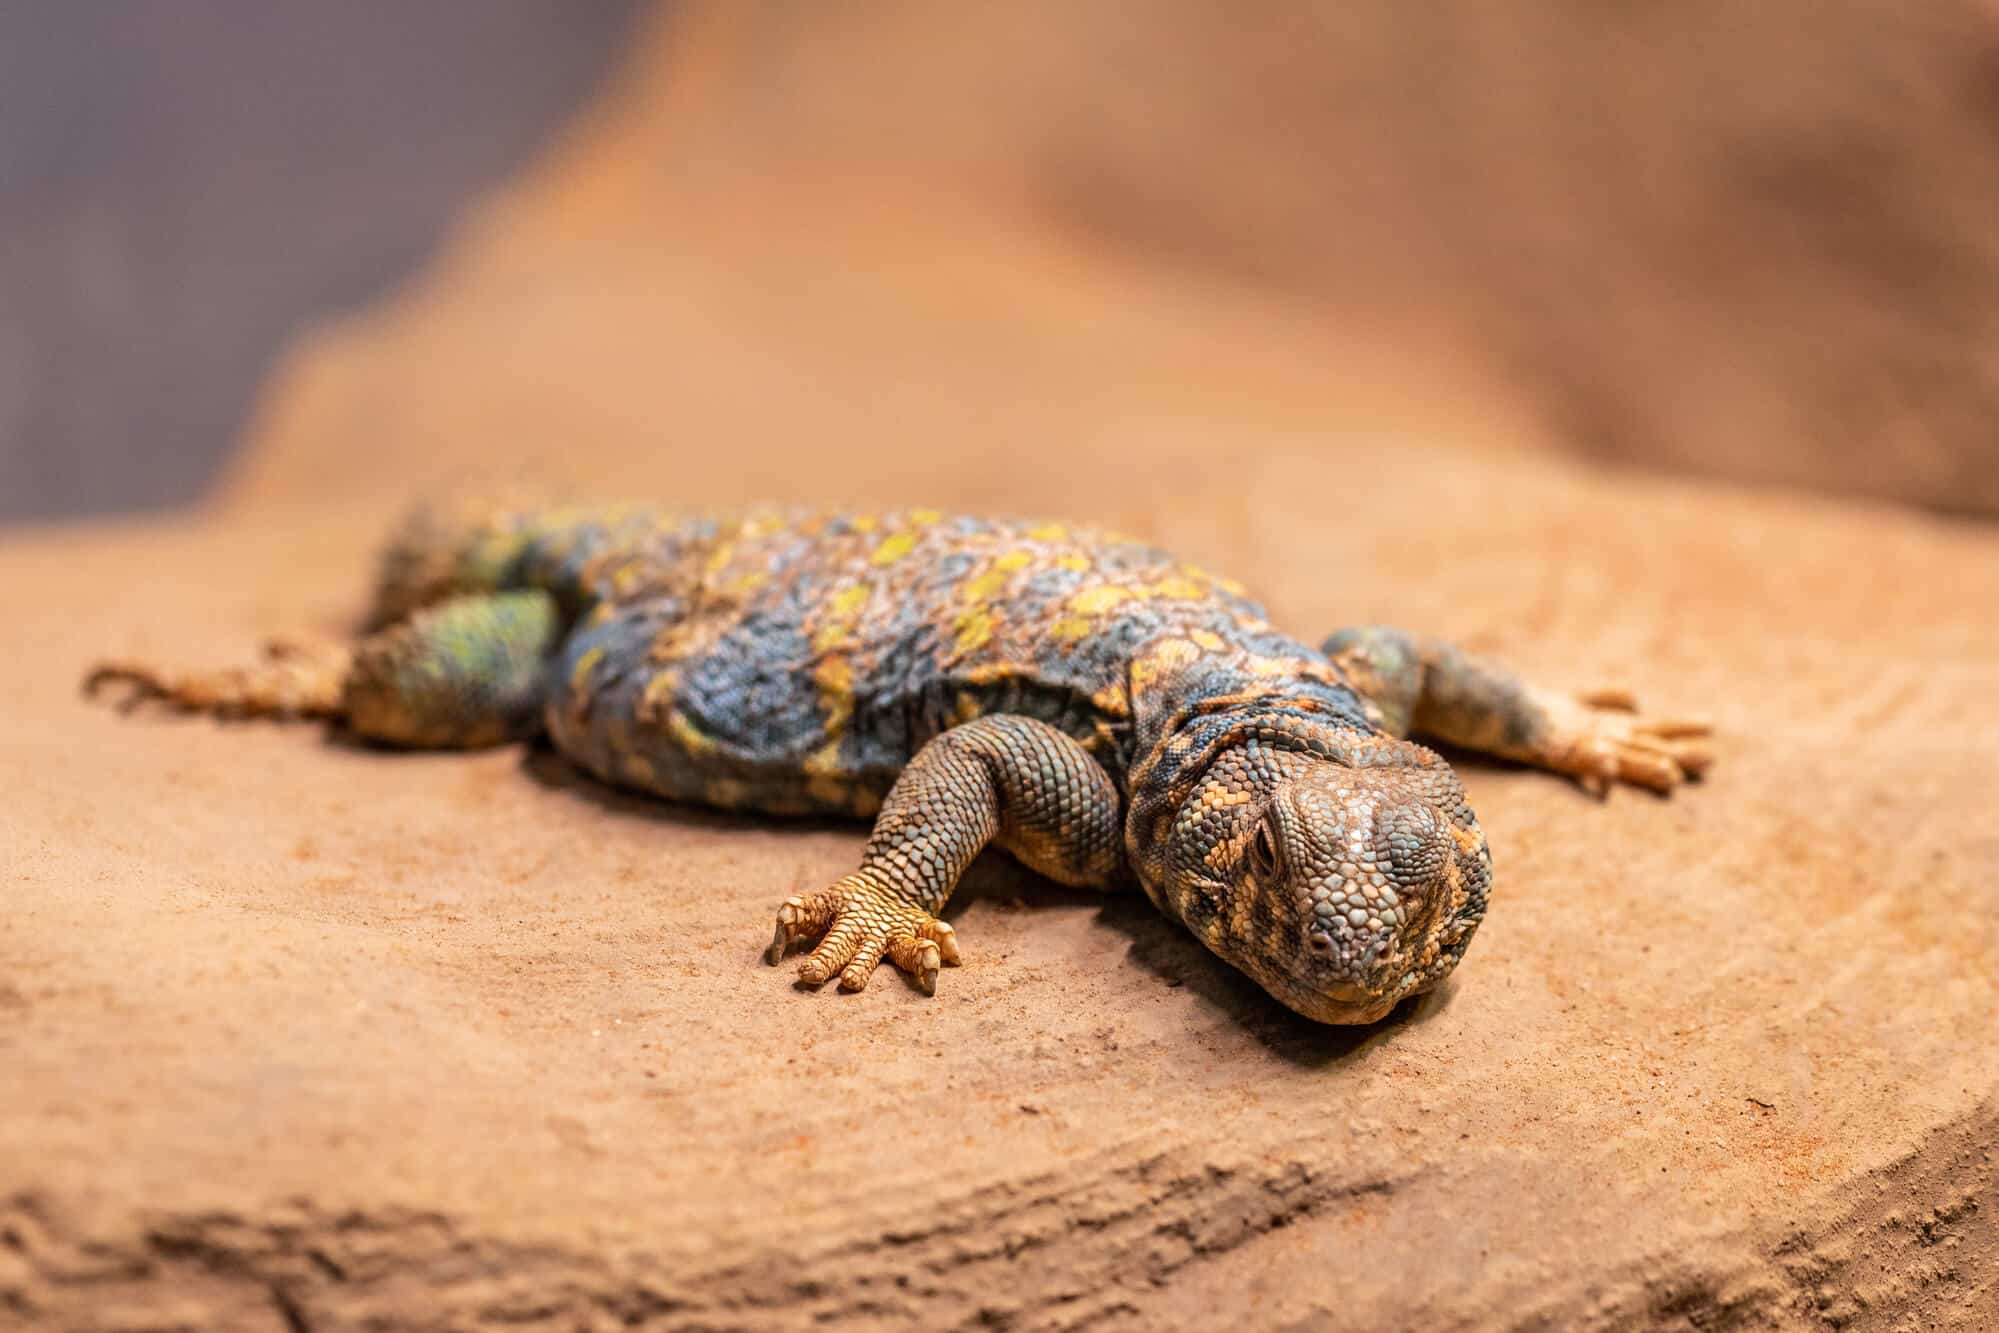 The ornate spiny-tailed lizard, Uromastyx ornata, also known as the ornate lizard, is a species of lizard in the agamidae family. The species is endemic to the Middle East. Illustration: depositphotos.com